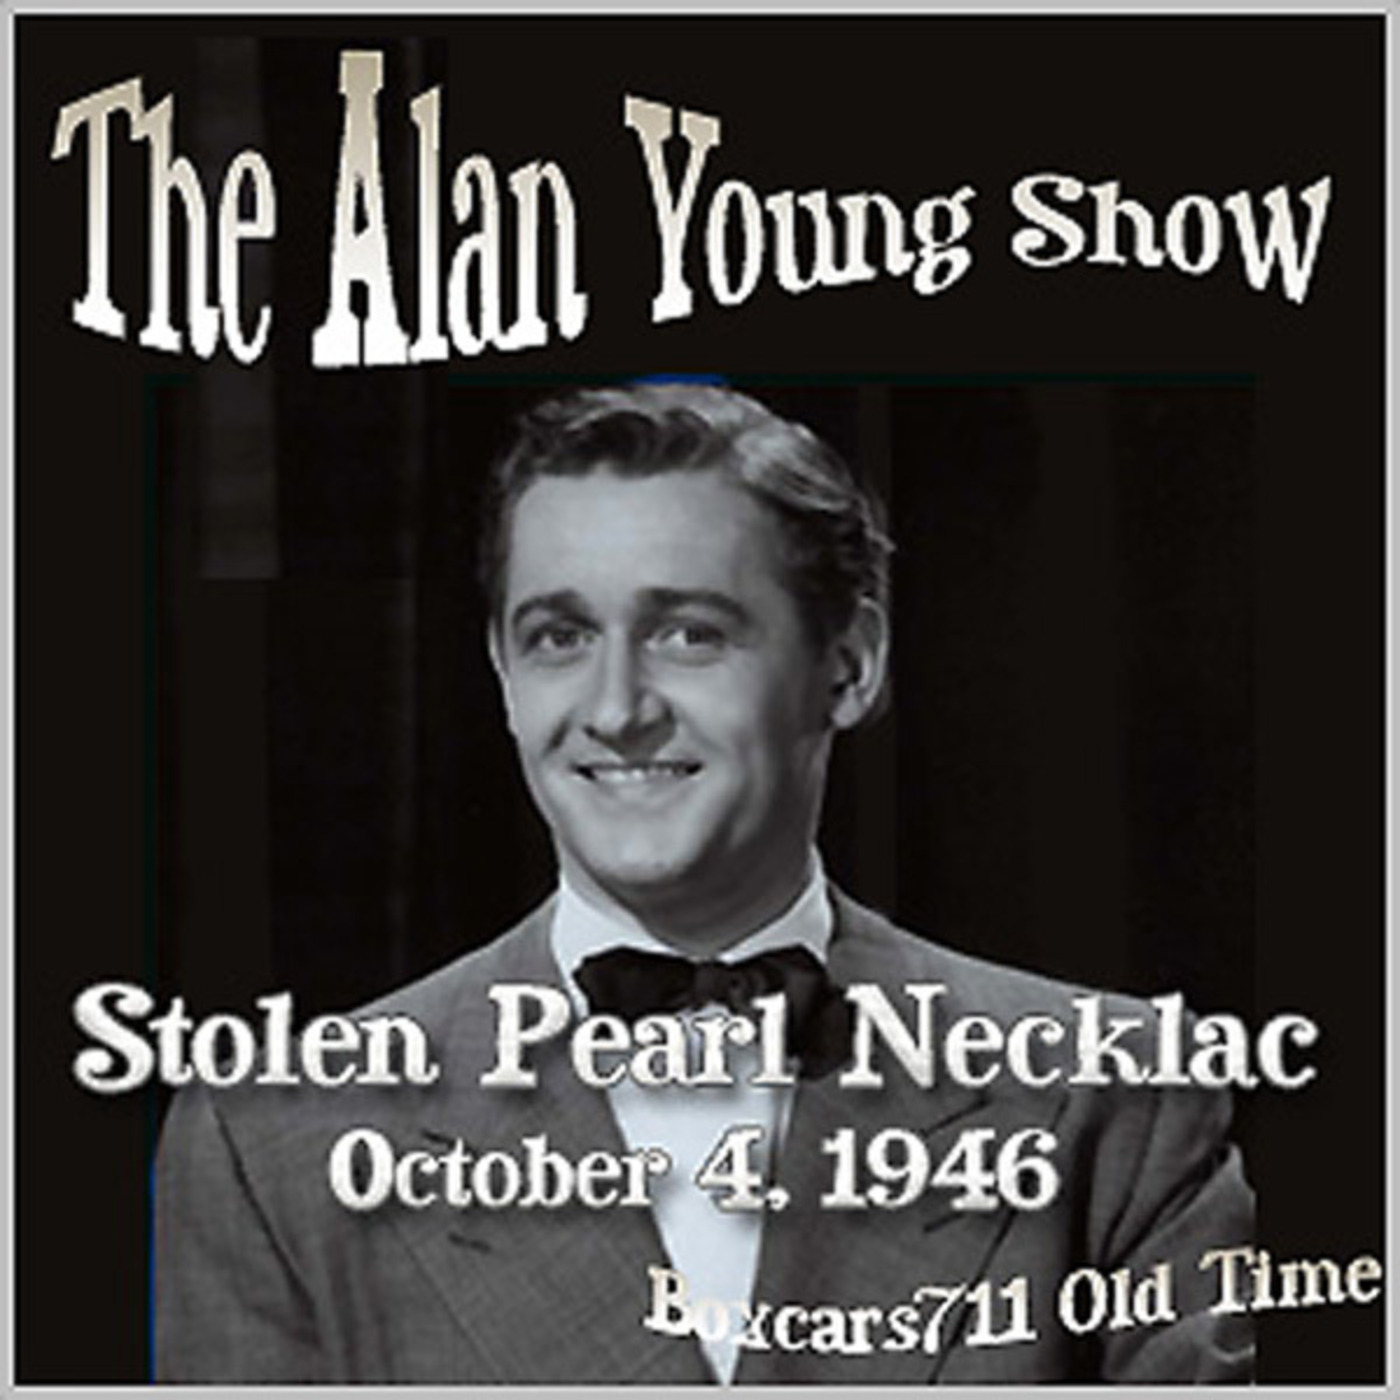 Episode 9591: The Alan Young Show - 